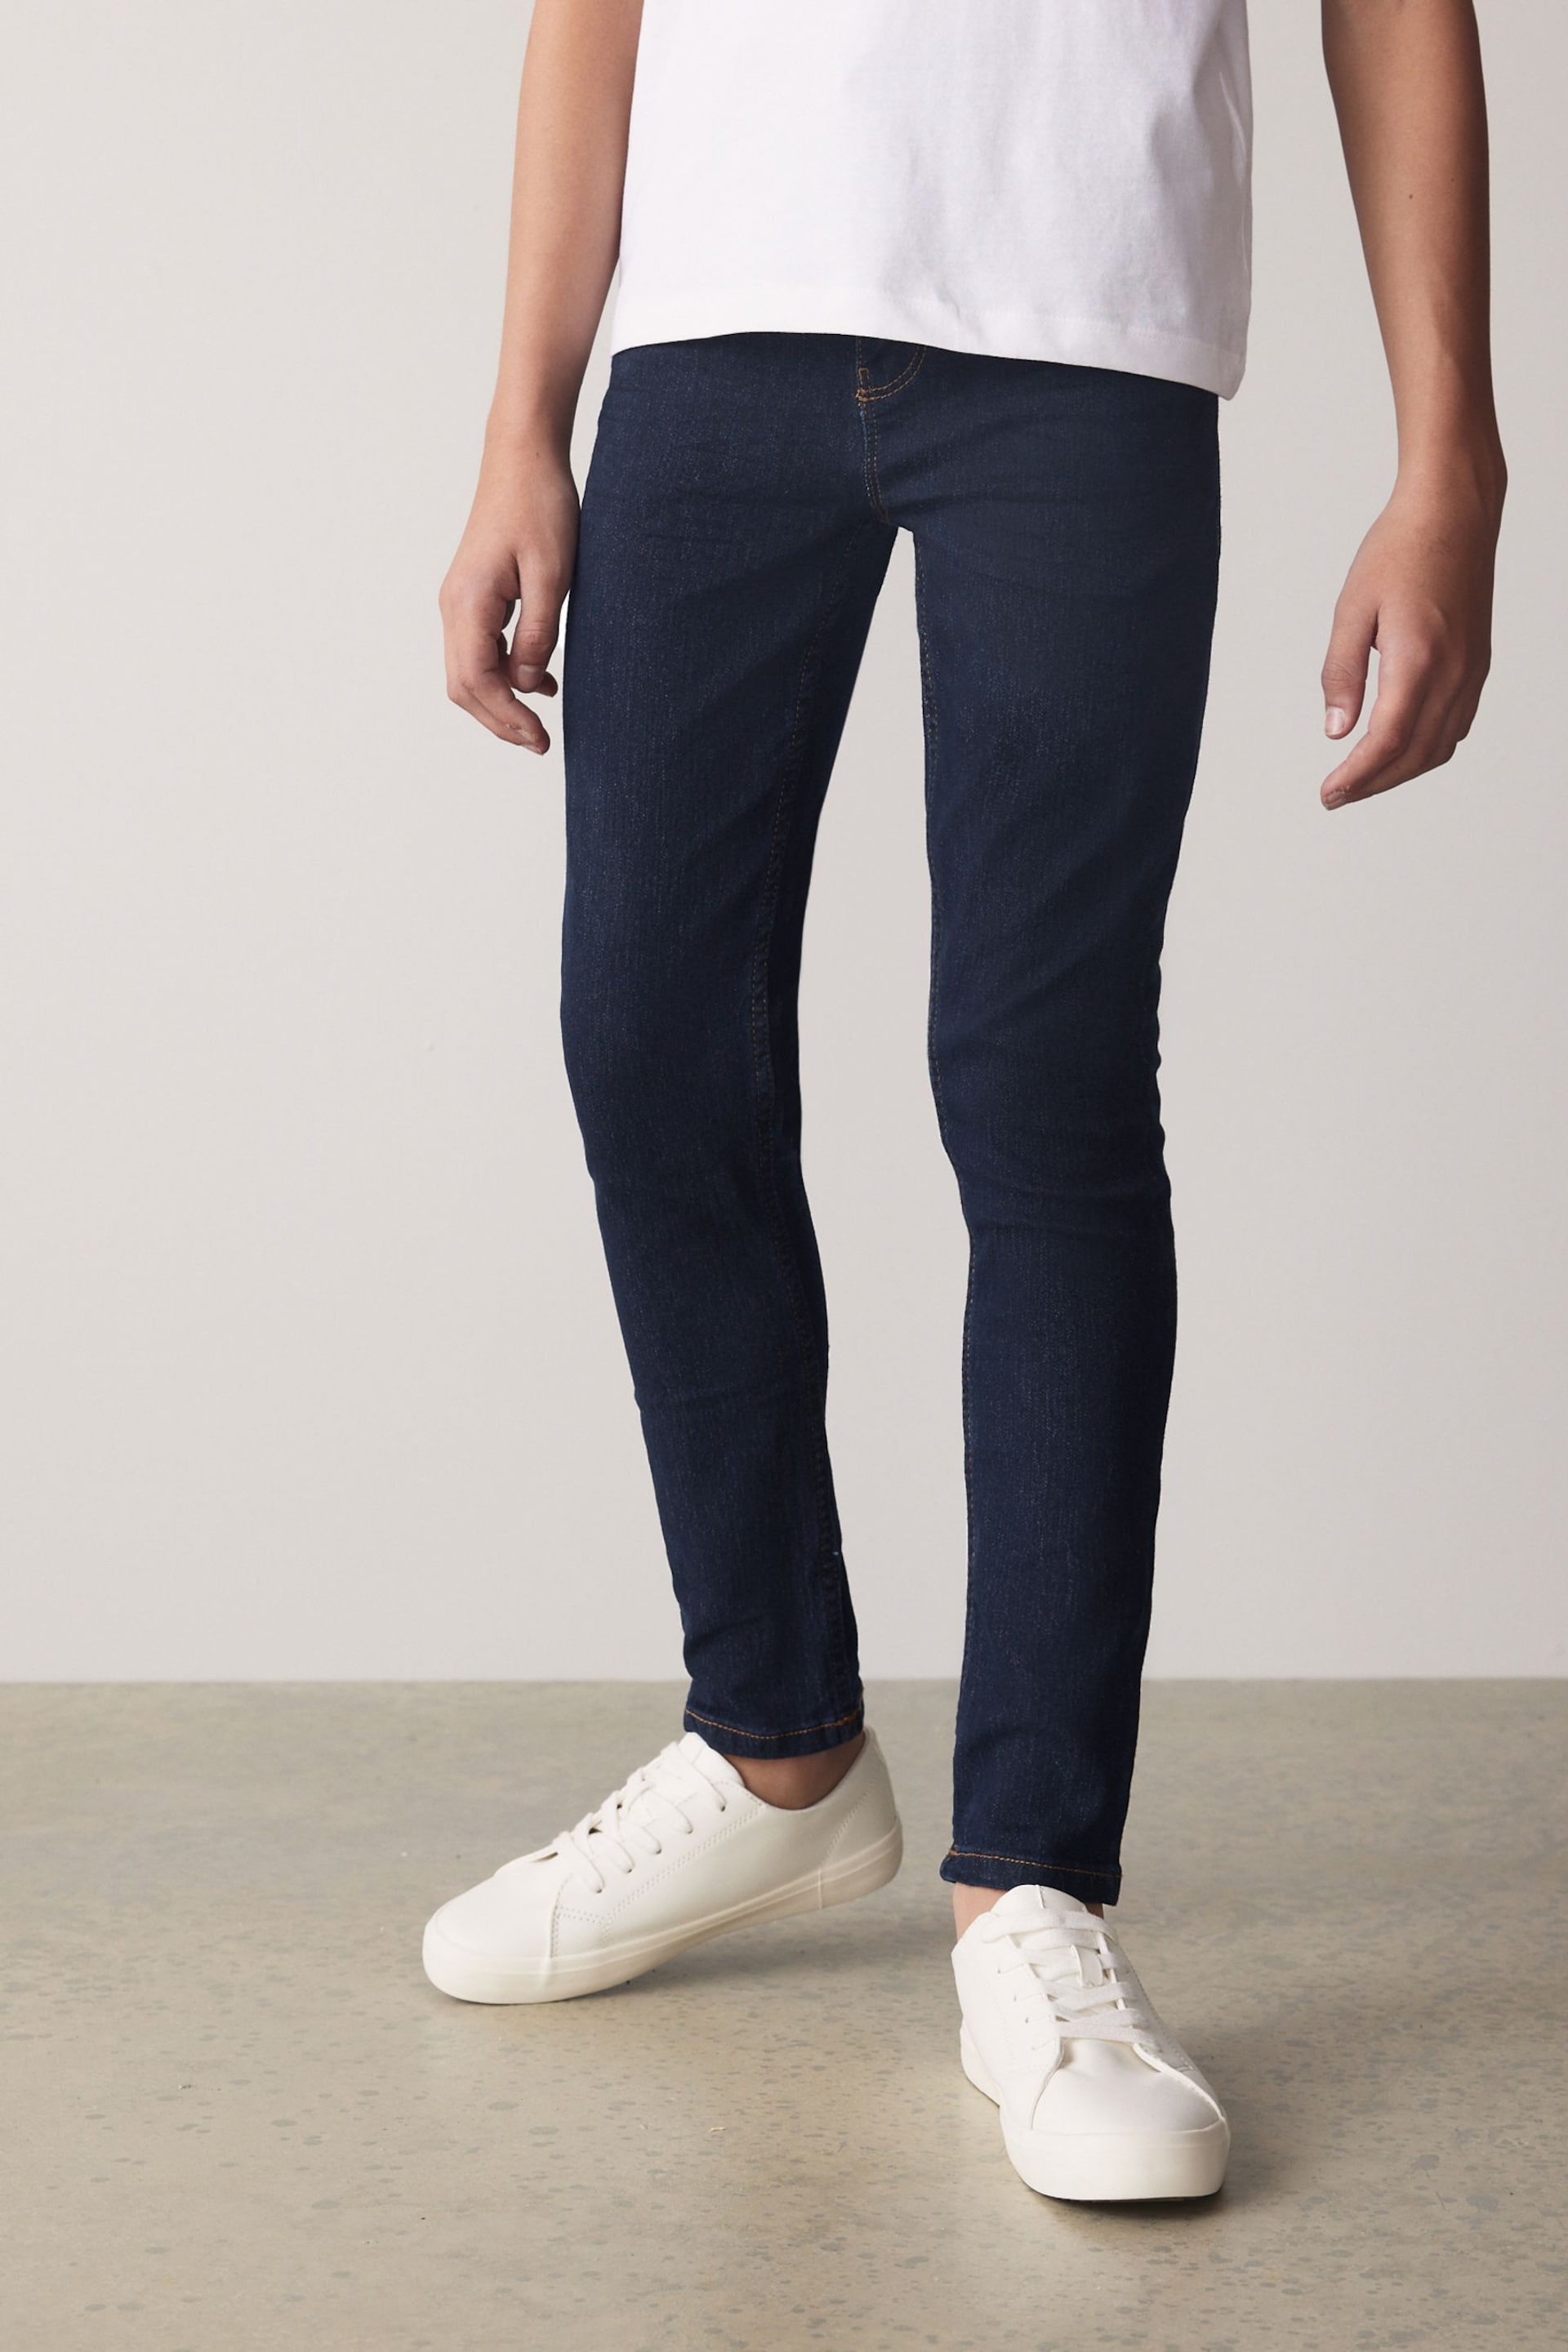 Blue Dark Super Skinny Fit Cotton Rich Stretch Jeans (3-17yrs) - Image 1 of 4